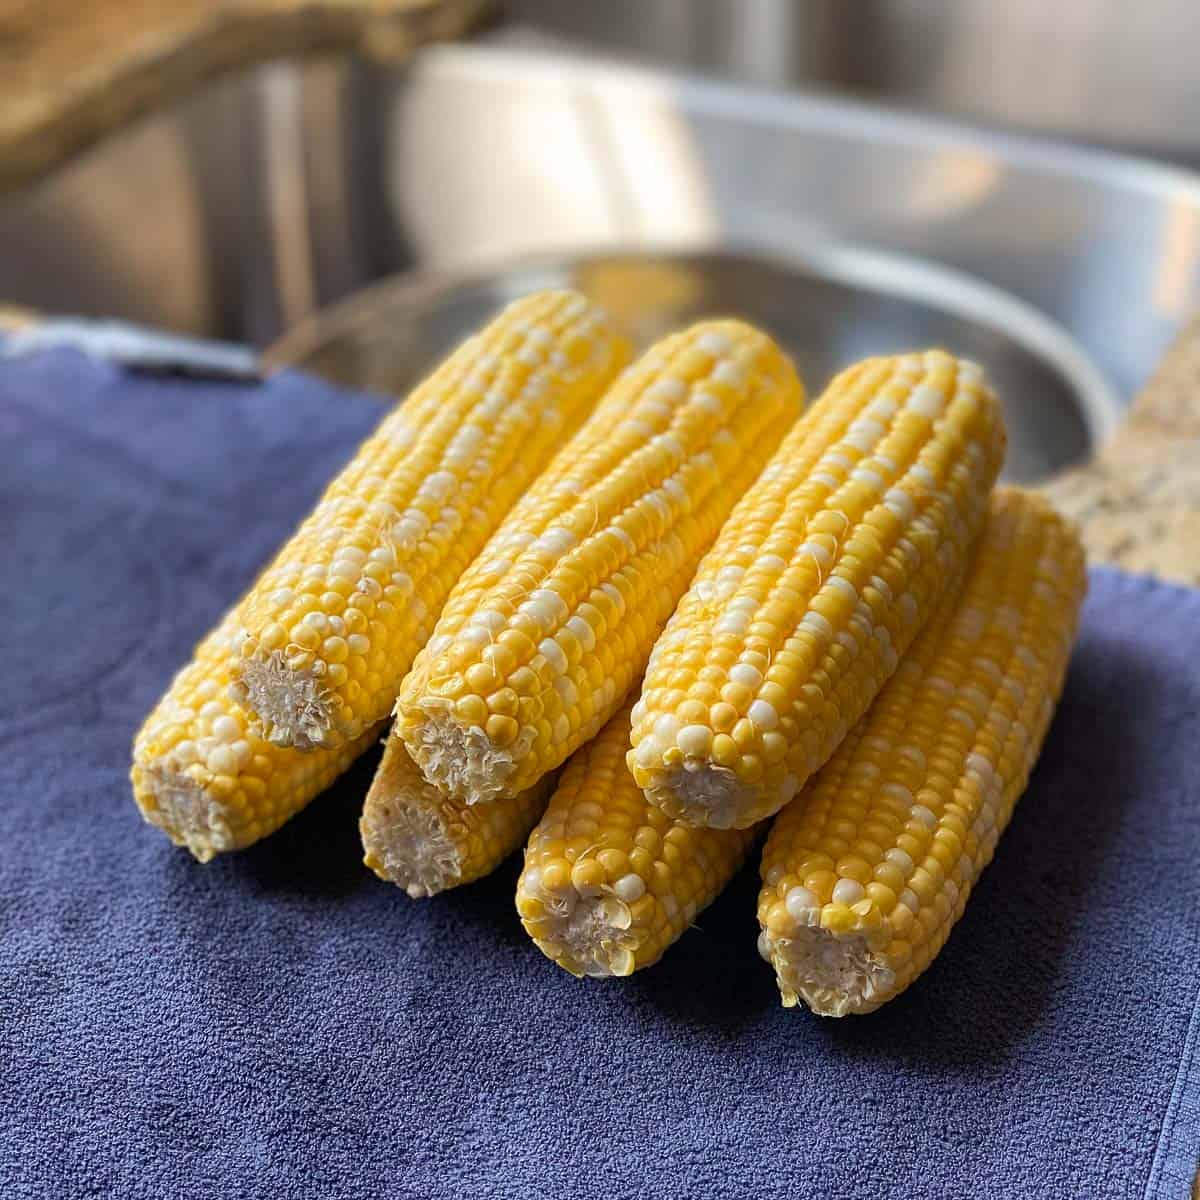 Fresh corn on the cob cleaned and stacked on a blue towel.